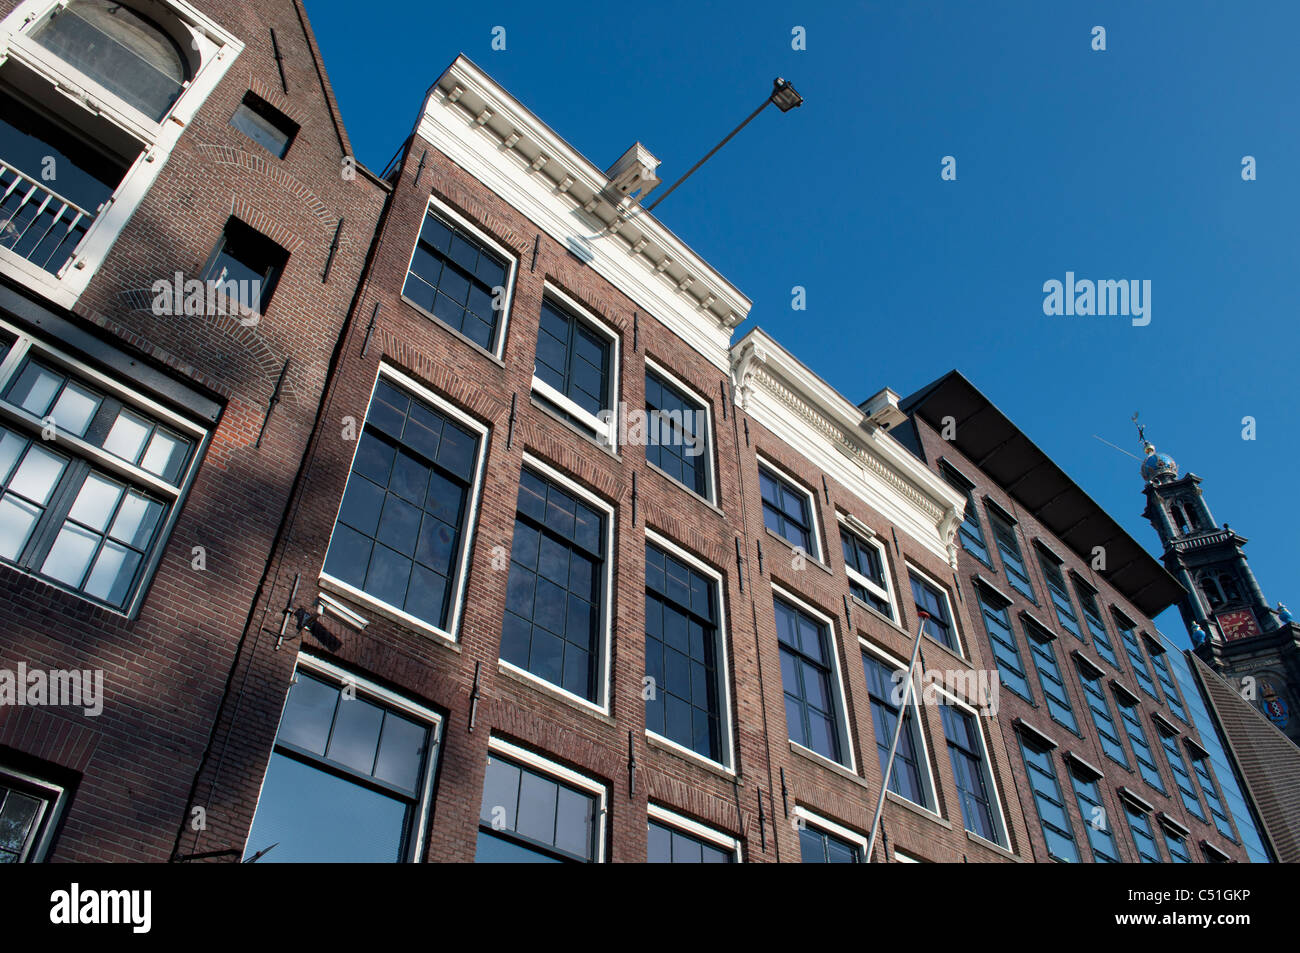 The house of the Jewish Holocaust victim, Annelies Marie Anne Frank, in Amsterdam, Holland Netherlands. Stock Photo